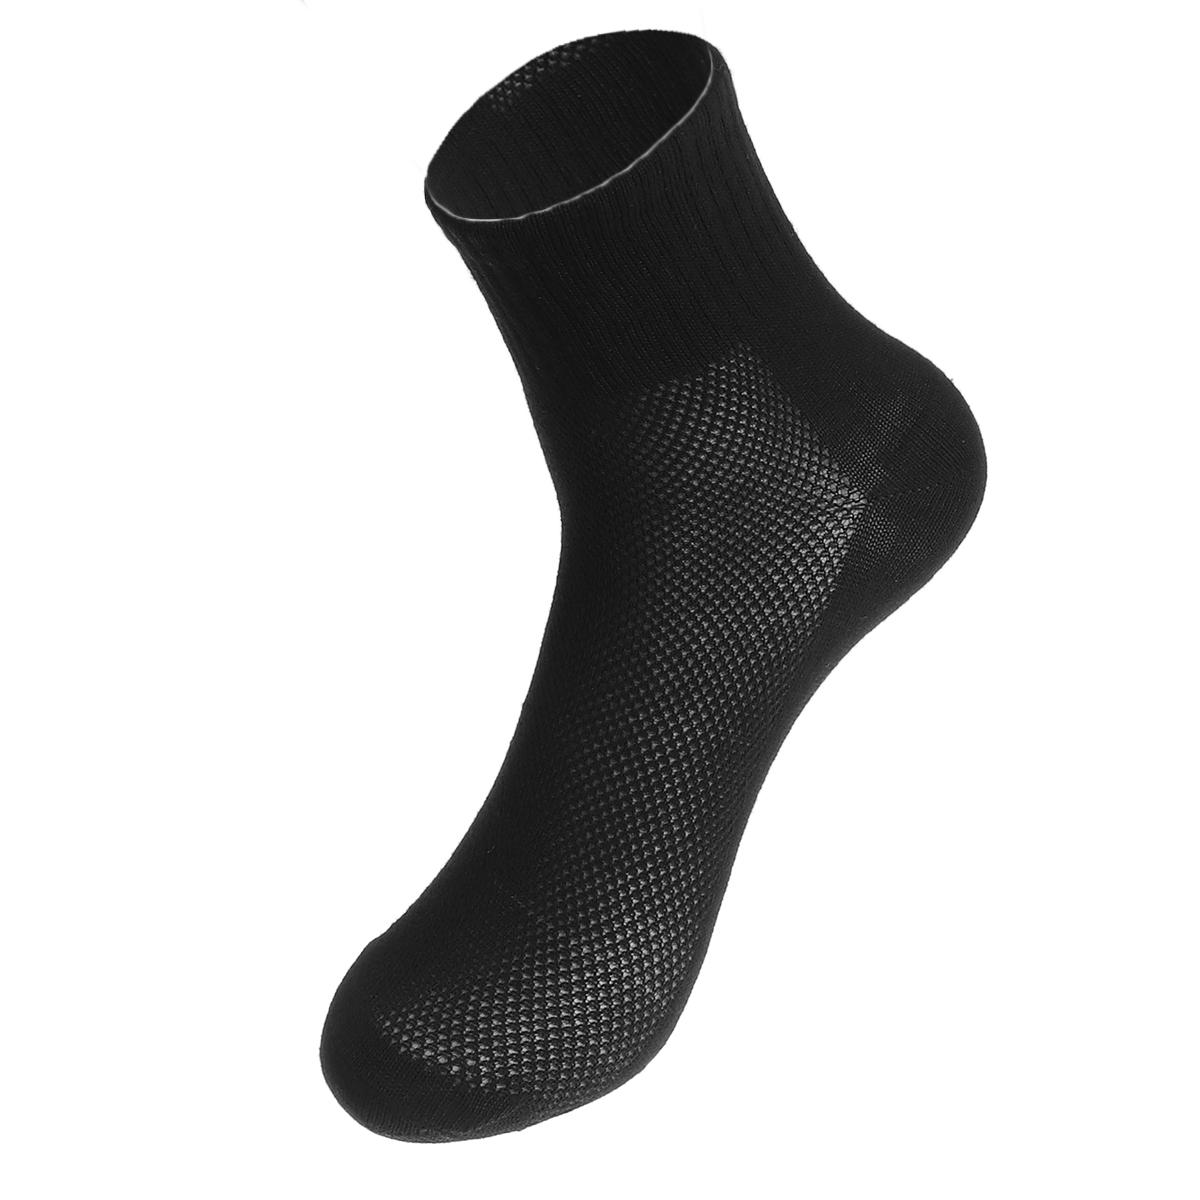 1 Pair of Tube Socks Winter Thermal Casual Soft Cotton Sport Mid High Ankle Socks BLACK